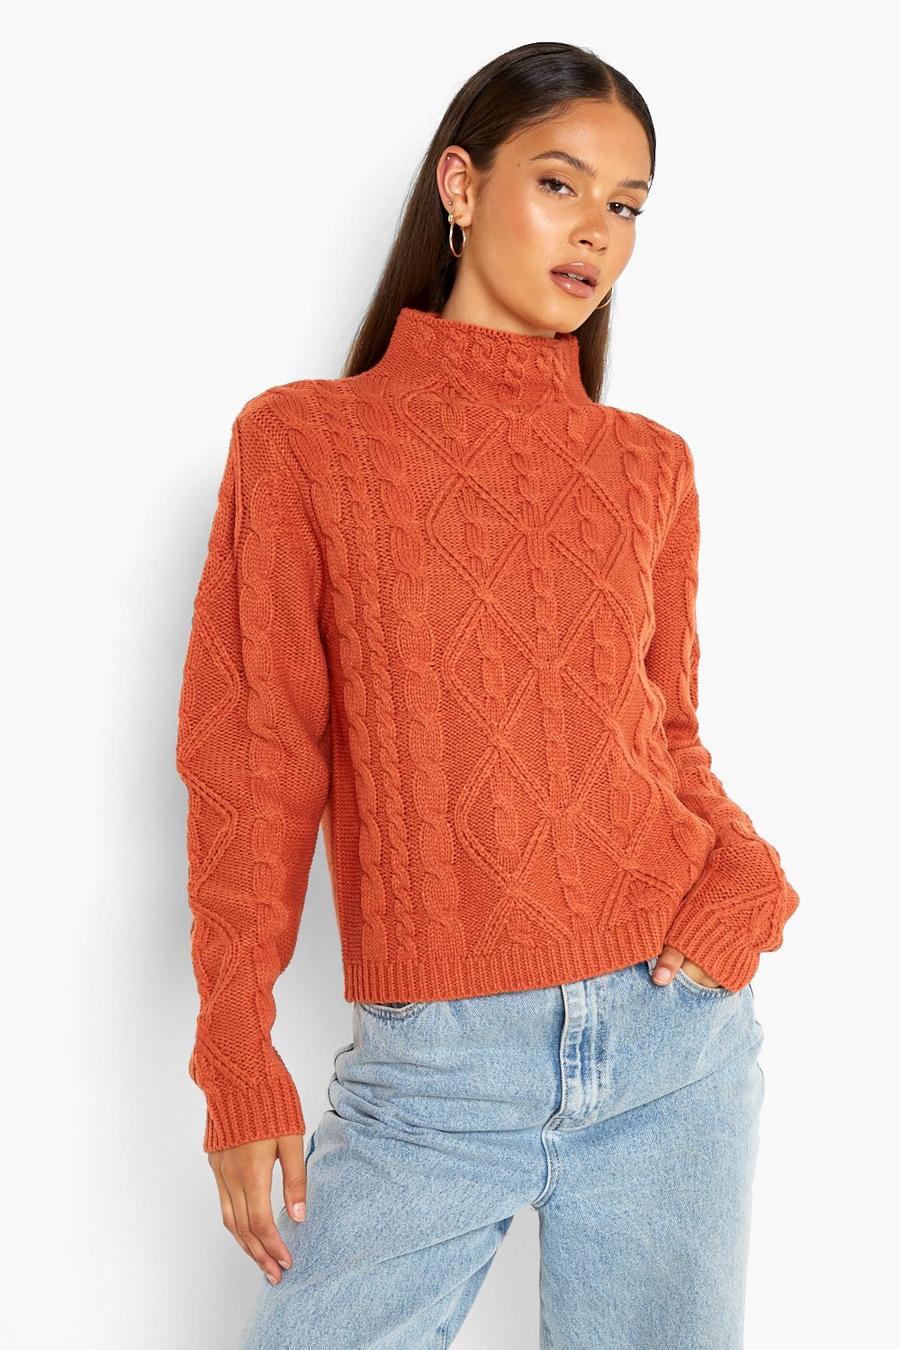 Terracotta orange Chunky Cable Knit Sweater